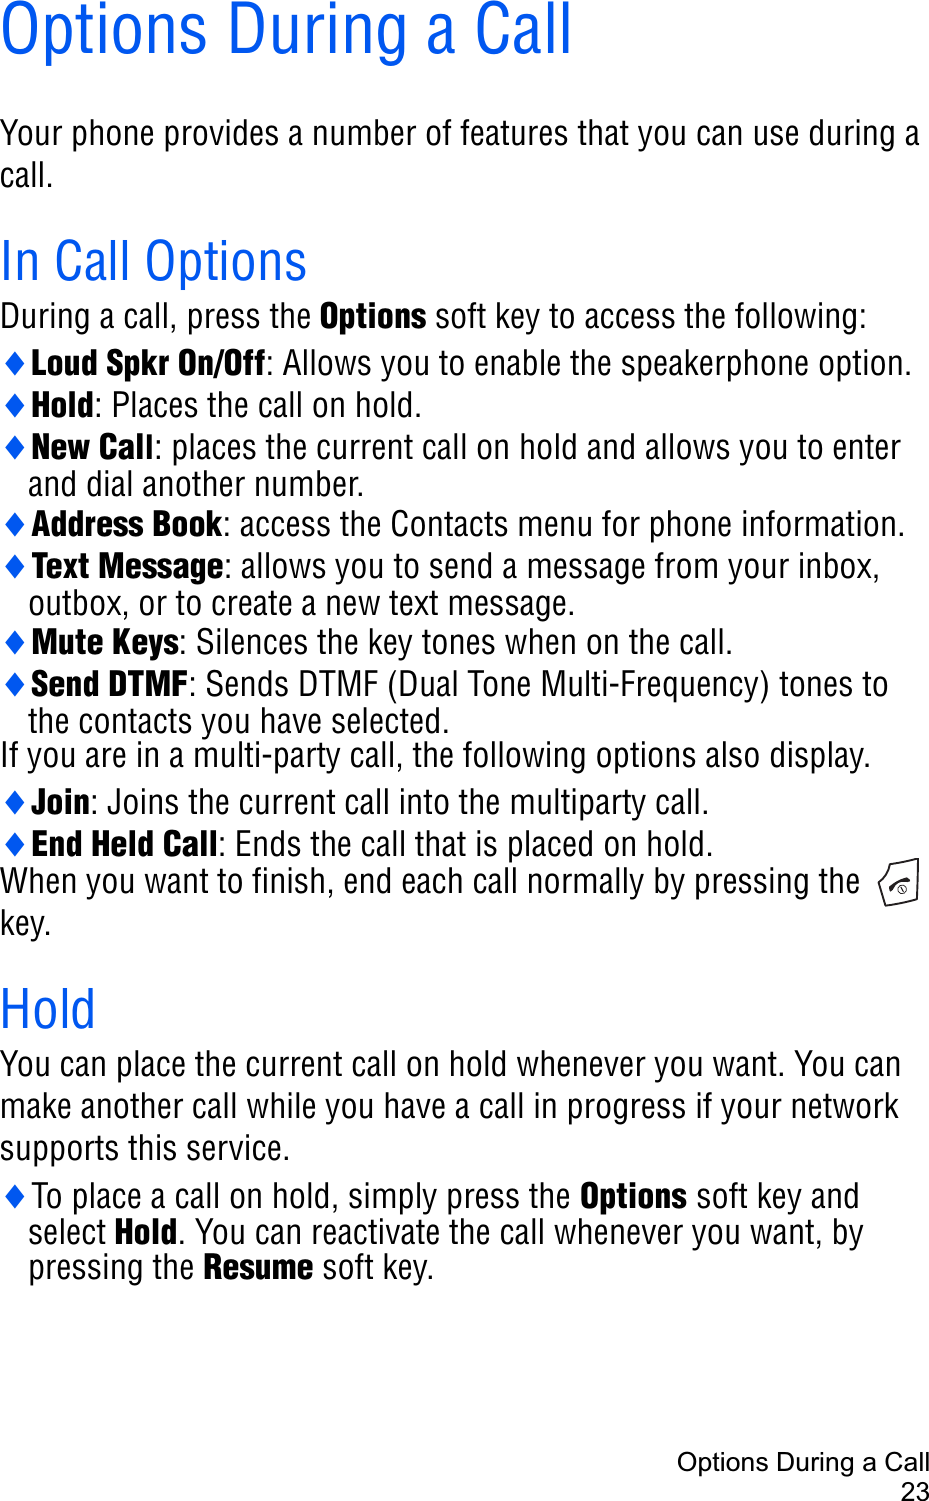 Options During a Call23Options During a CallYour phone provides a number of features that you can use during a call. In Call OptionsDuring a call, press the Options soft key to access the following:iLoud Spkr On/Off: Allows you to enable the speakerphone option. iHold: Places the call on hold.iNew Call: places the current call on hold and allows you to enter and dial another number.iAddress Book: access the Contacts menu for phone information.iText Message: allows you to send a message from your inbox, outbox, or to create a new text message.iMute Keys: Silences the key tones when on the call.iSend DTMF: Sends DTMF (Dual Tone Multi-Frequency) tones to the contacts you have selected.If you are in a multi-party call, the following options also display.iJoin: Joins the current call into the multiparty call.iEnd Held Call: Ends the call that is placed on hold.When you want to finish, end each call normally by pressing the   key.HoldYou can place the current call on hold whenever you want. You can make another call while you have a call in progress if your network supports this service. iTo place a call on hold, simply press the Options soft key and select Hold. You can reactivate the call whenever you want, by pressing the Resume soft key.